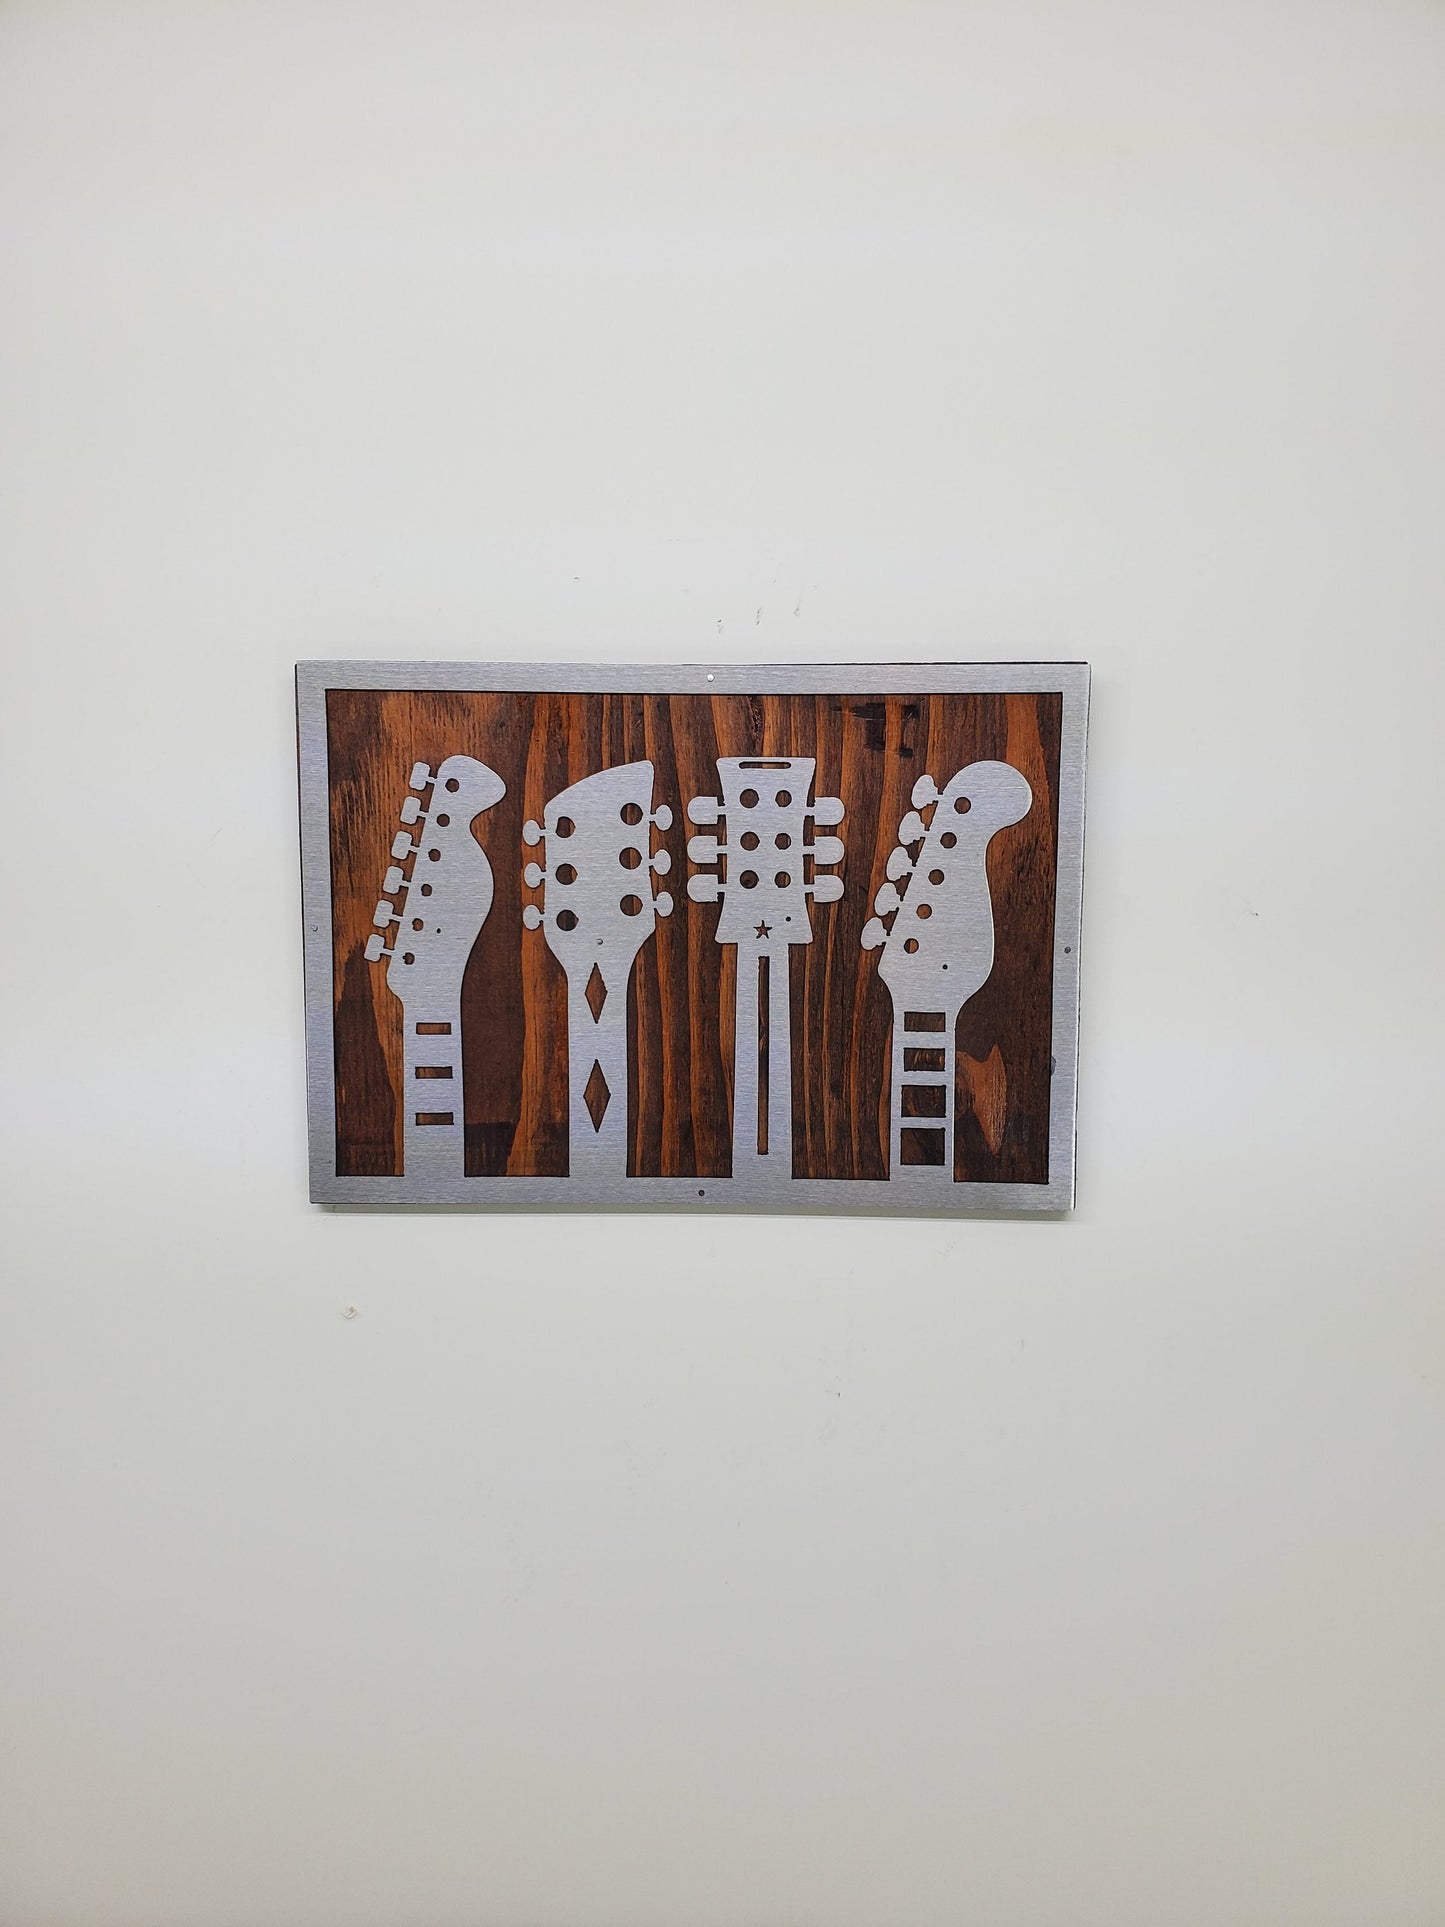 Guitar Headstock Metal Art on Wood Wall Décor | Made in USA